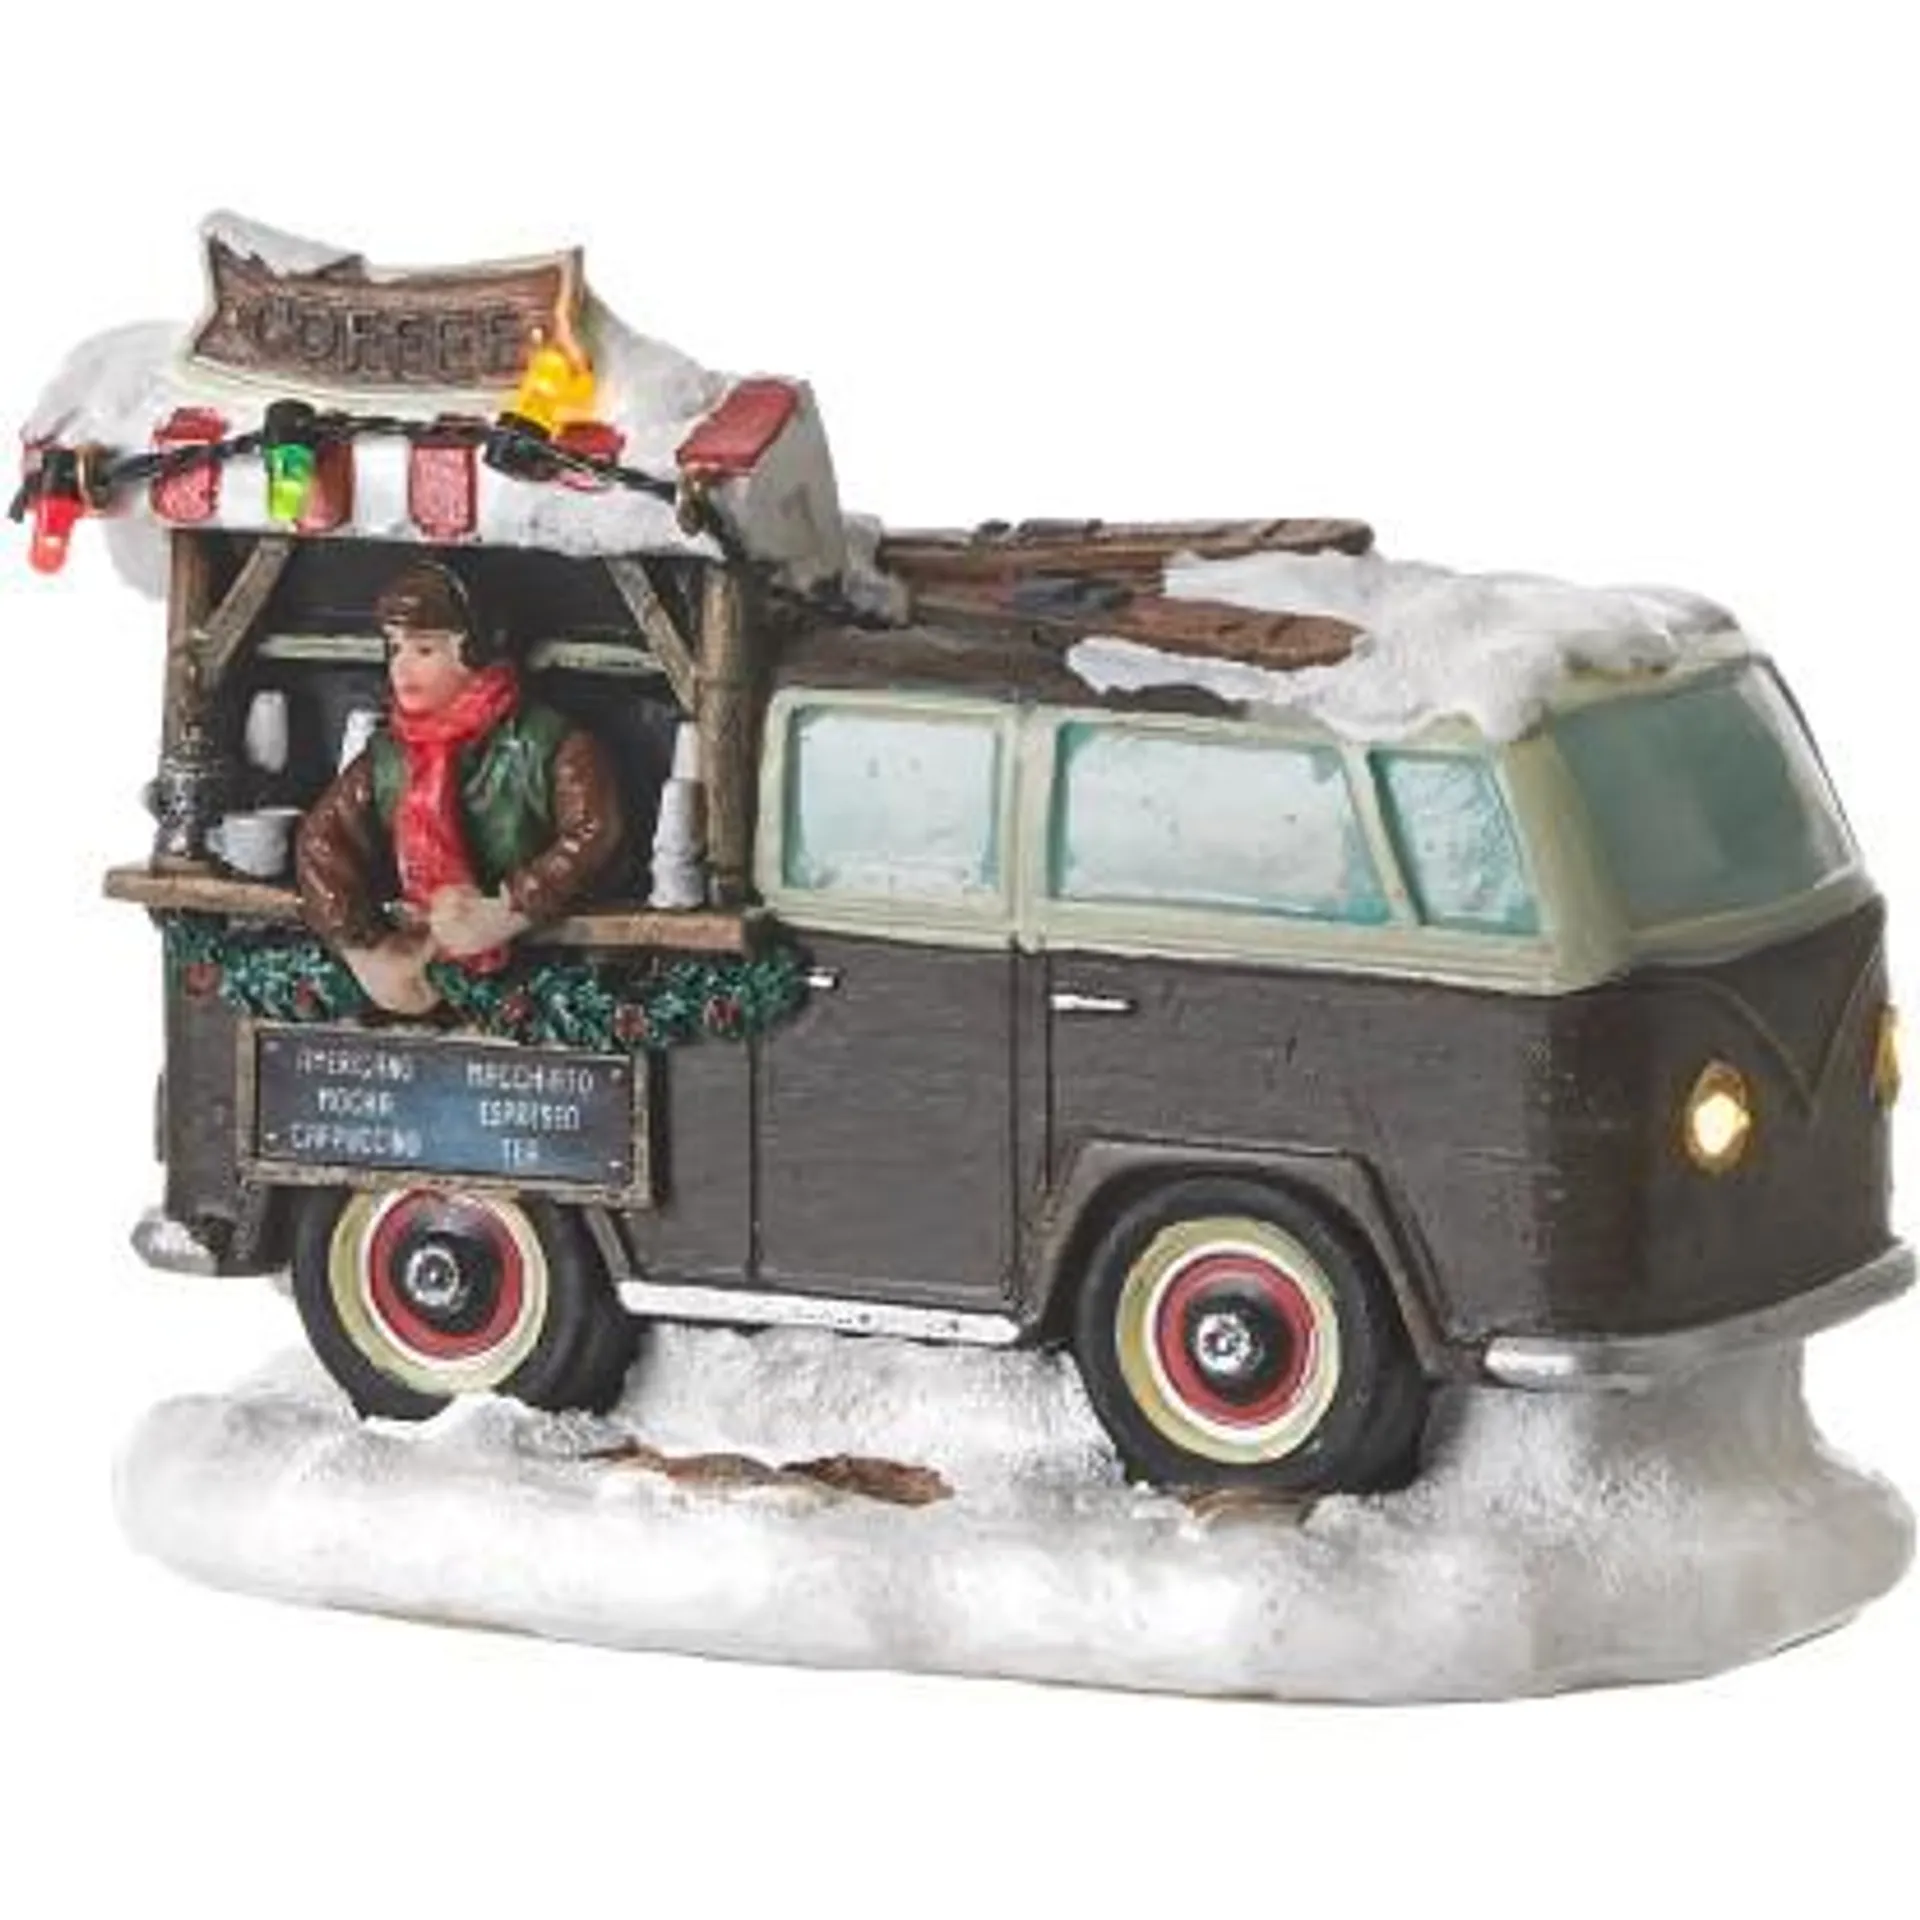 Luville Collections LED-es VW foodtruck 14 cm x 8 cm x 10 cm barna